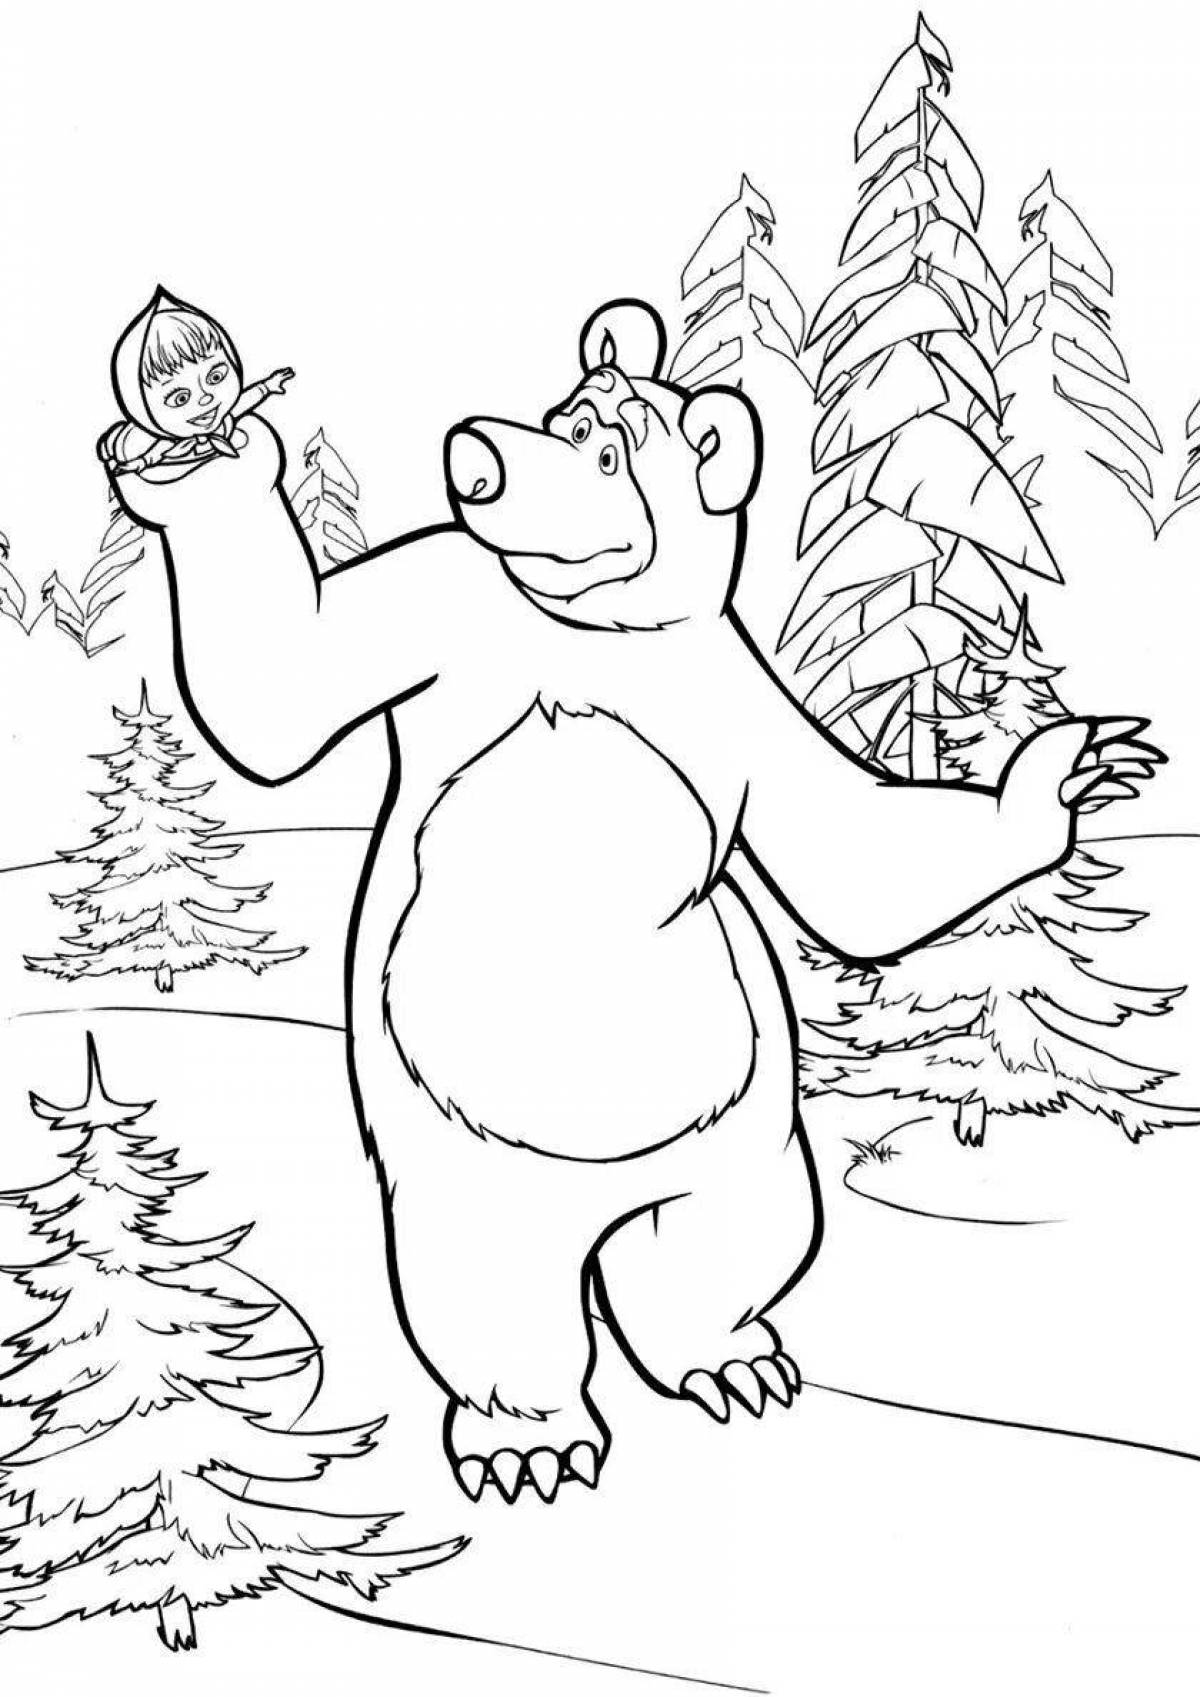 Fancy Masha and the Bear coloring book